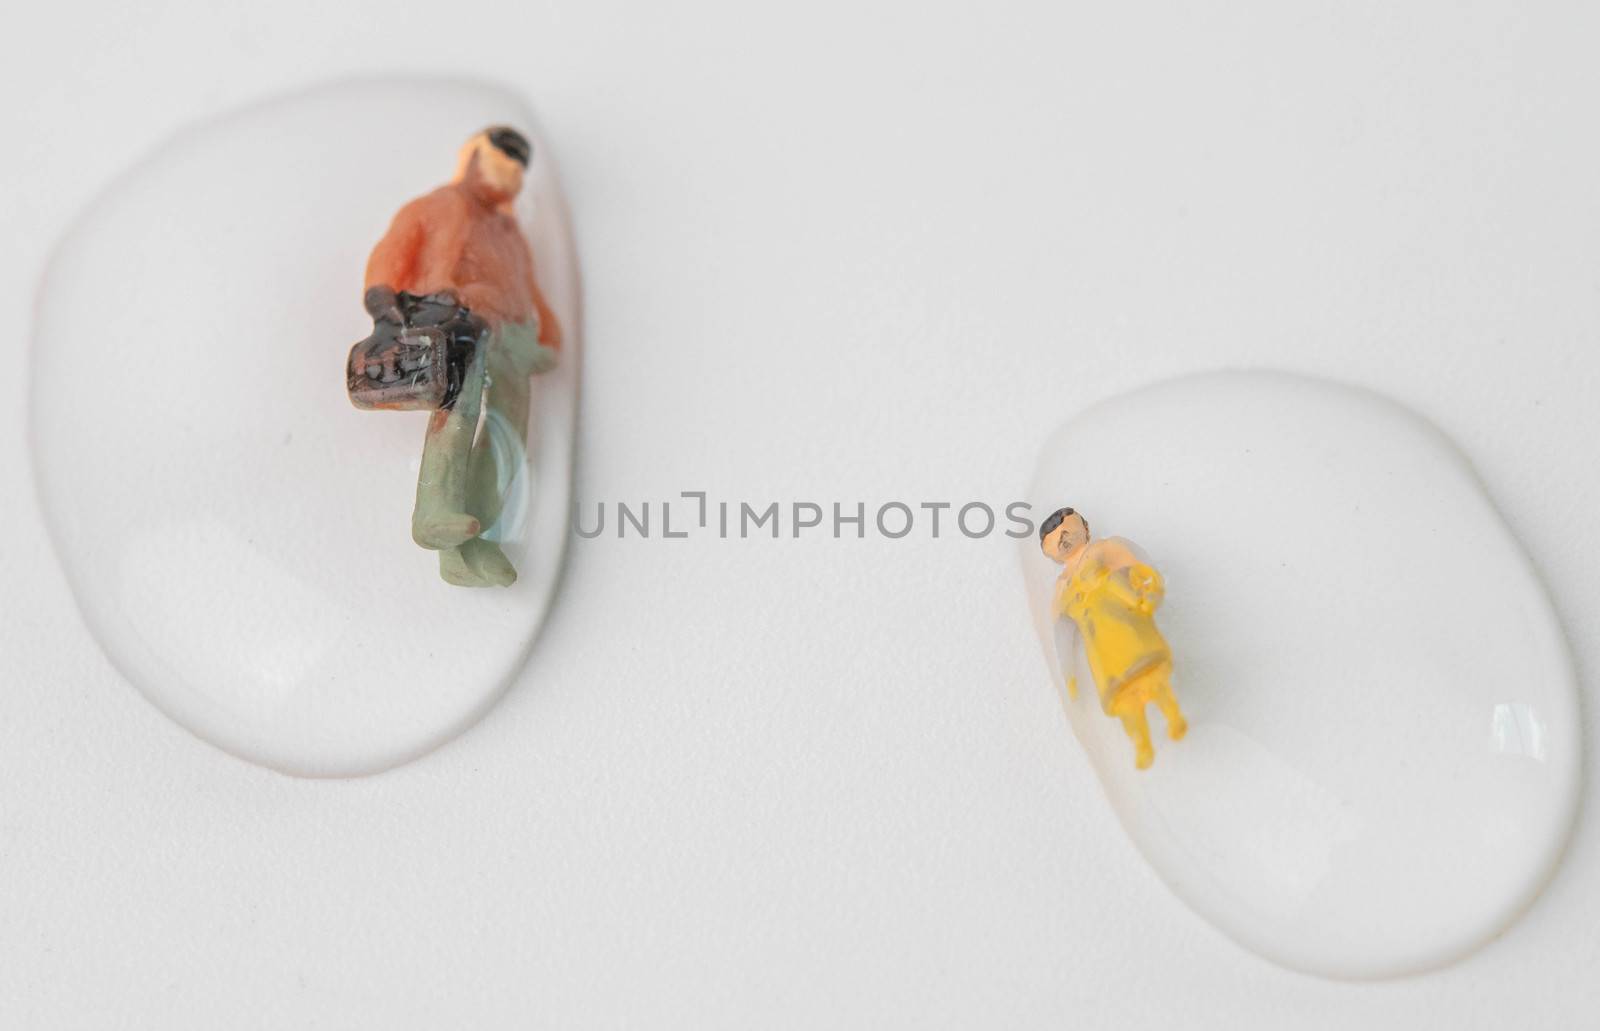 Miniature people get drowned in drops of water on white background. Macro photography concept idea for solution of solving problems in the wrong life.